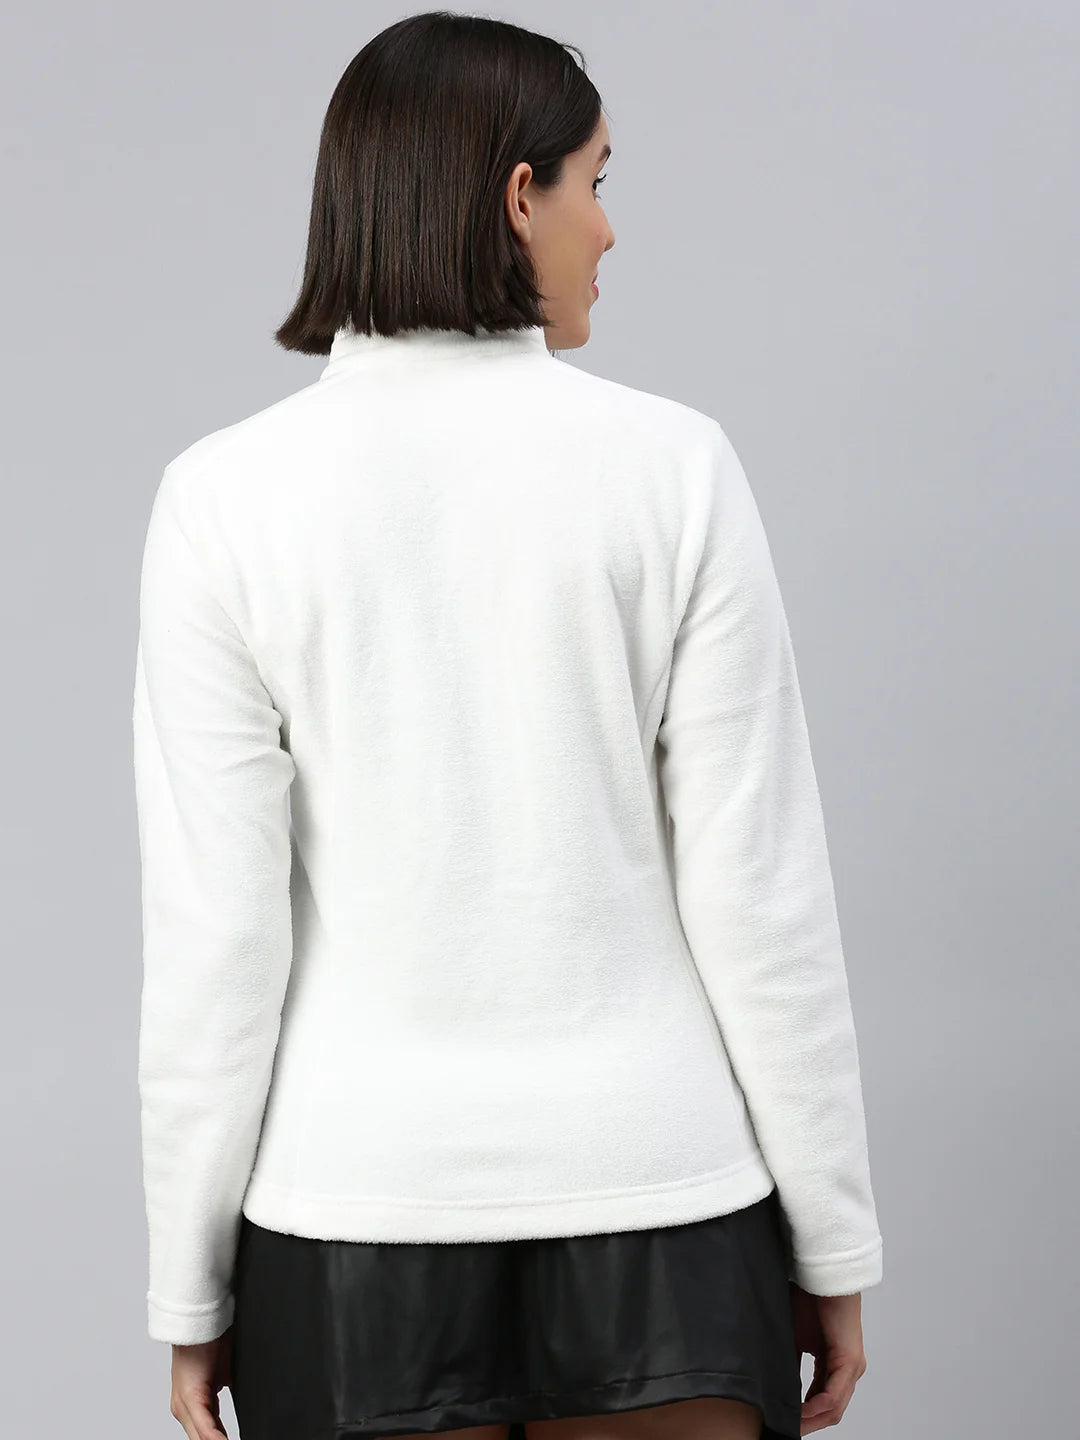 donna-montreal-poliestere-giacca in pile-blanc-casse-back